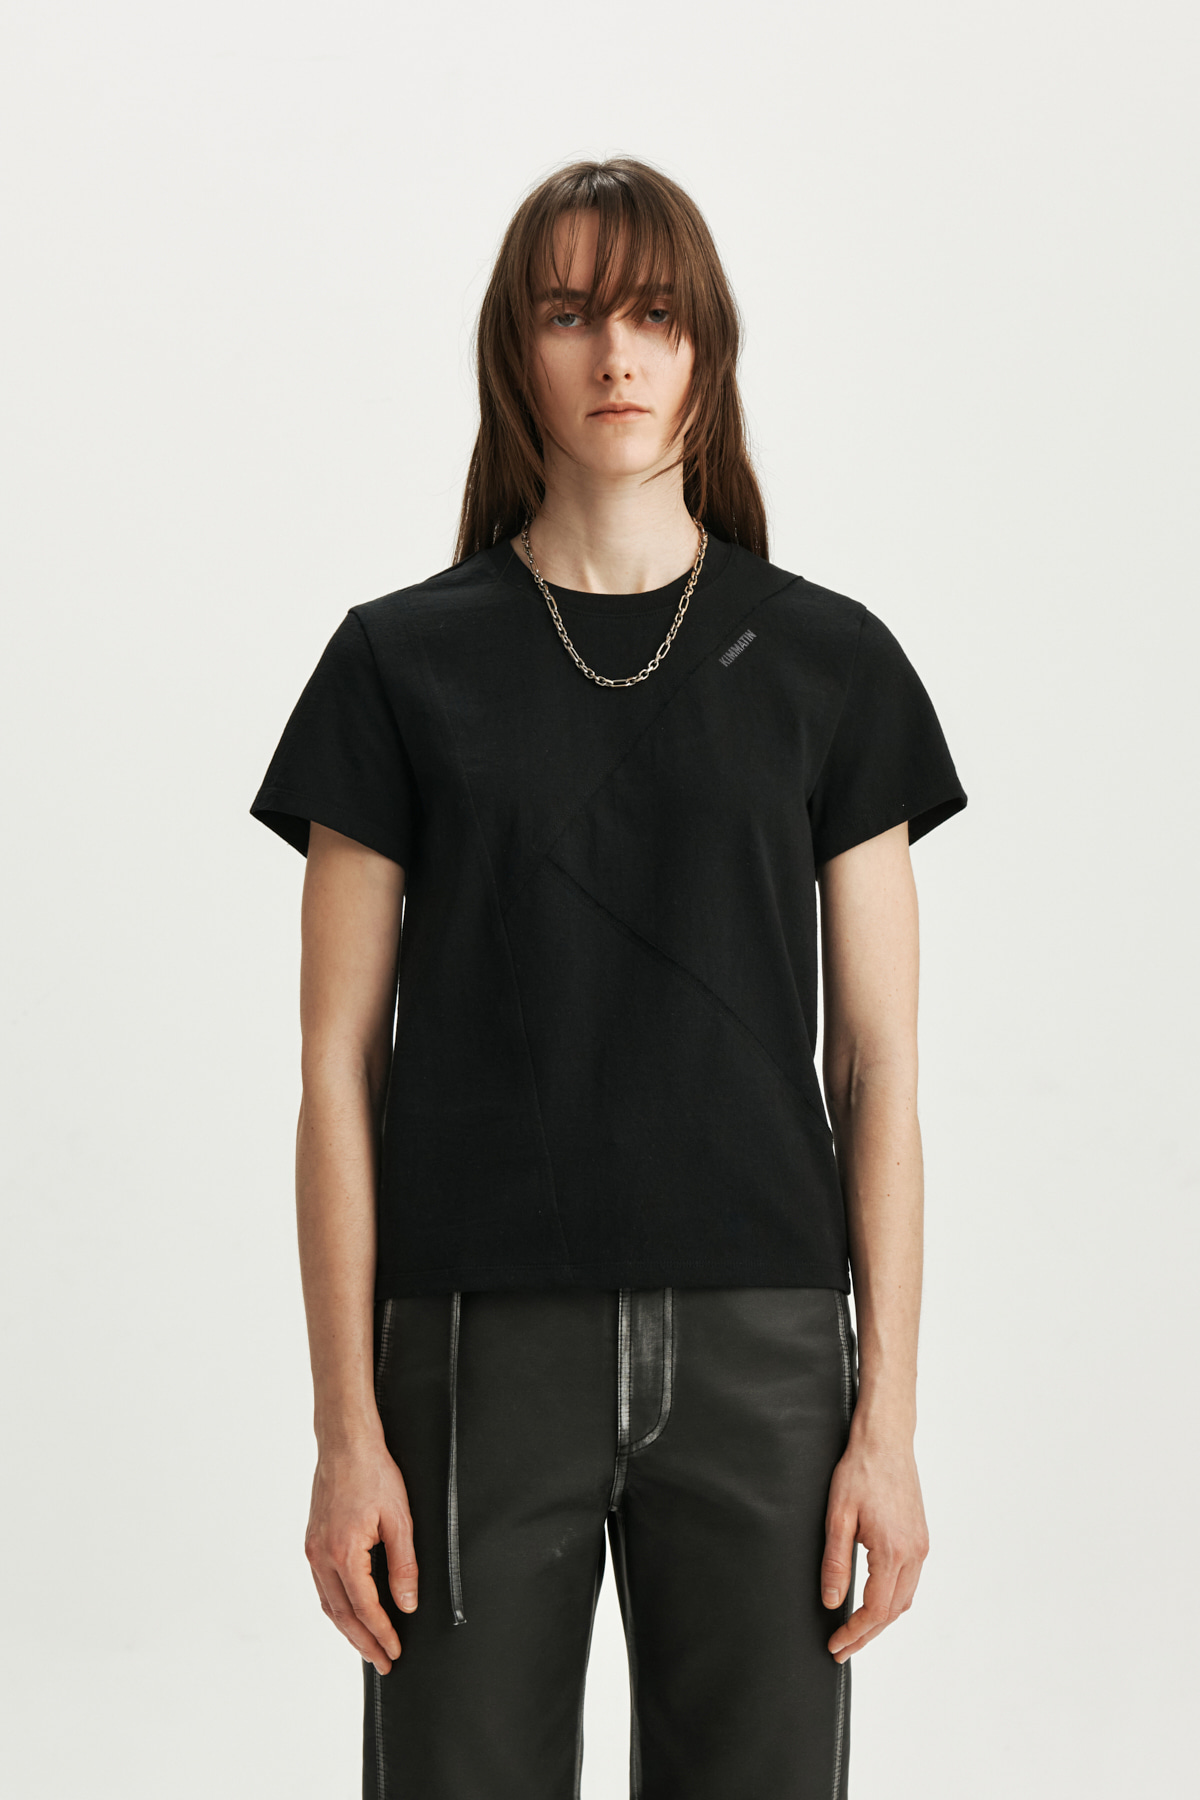 CUT POINT SMALL LOGO TOP IN BLACK